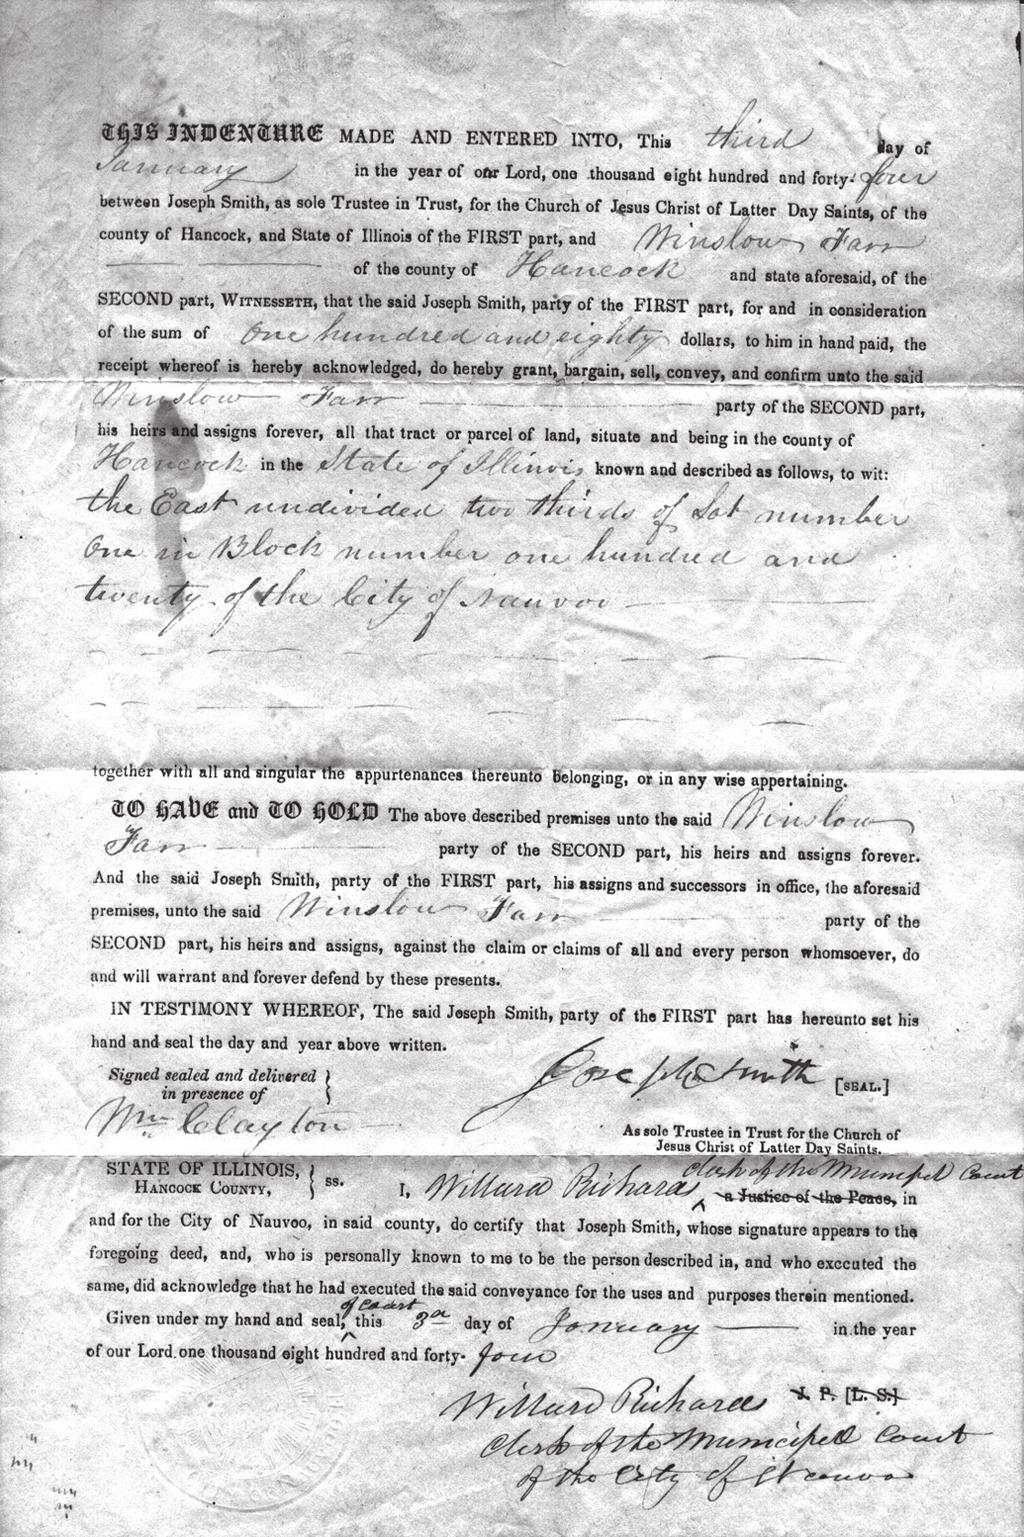 Lorin Farr, Friend of the Prophet 63 Deed to Winslow Farr s property (father of Lorin Farr), Nauvoo, Illinois, signed by the